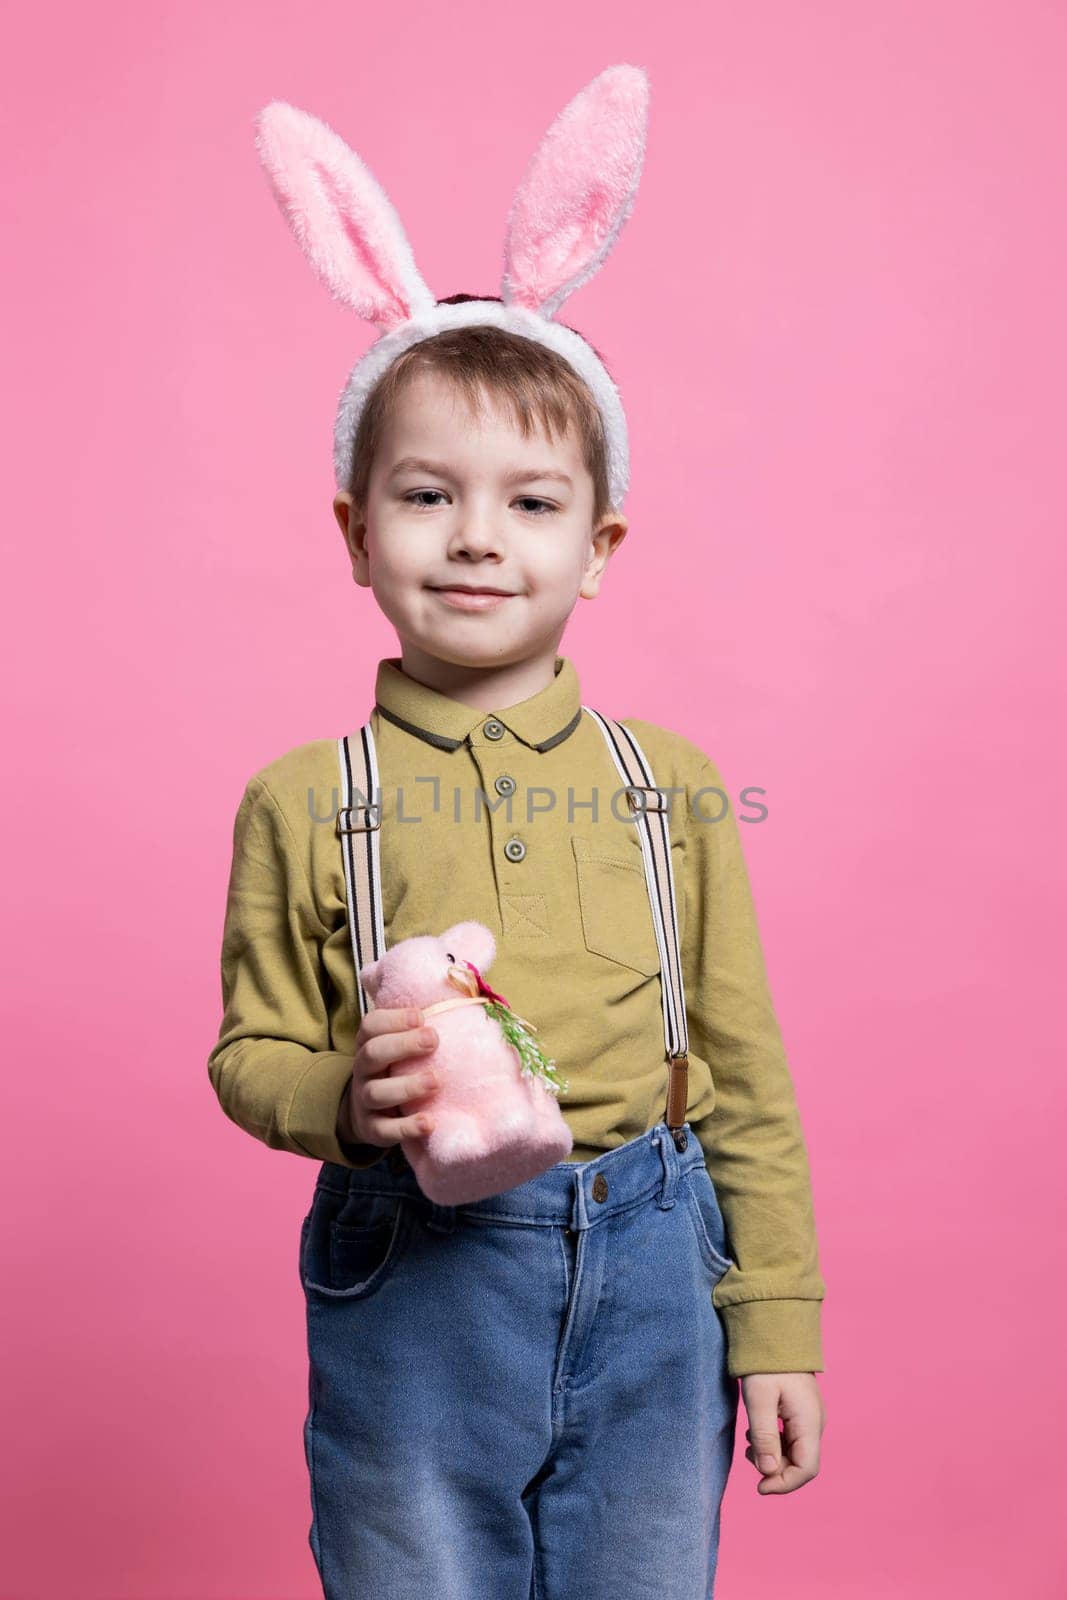 Joyful little boy holding a fluffy stuffed rabbit in front of on camera, wearing bunny ears and feeling excited about easter celebration. Small kid smiling and being happy against pink backdrop.